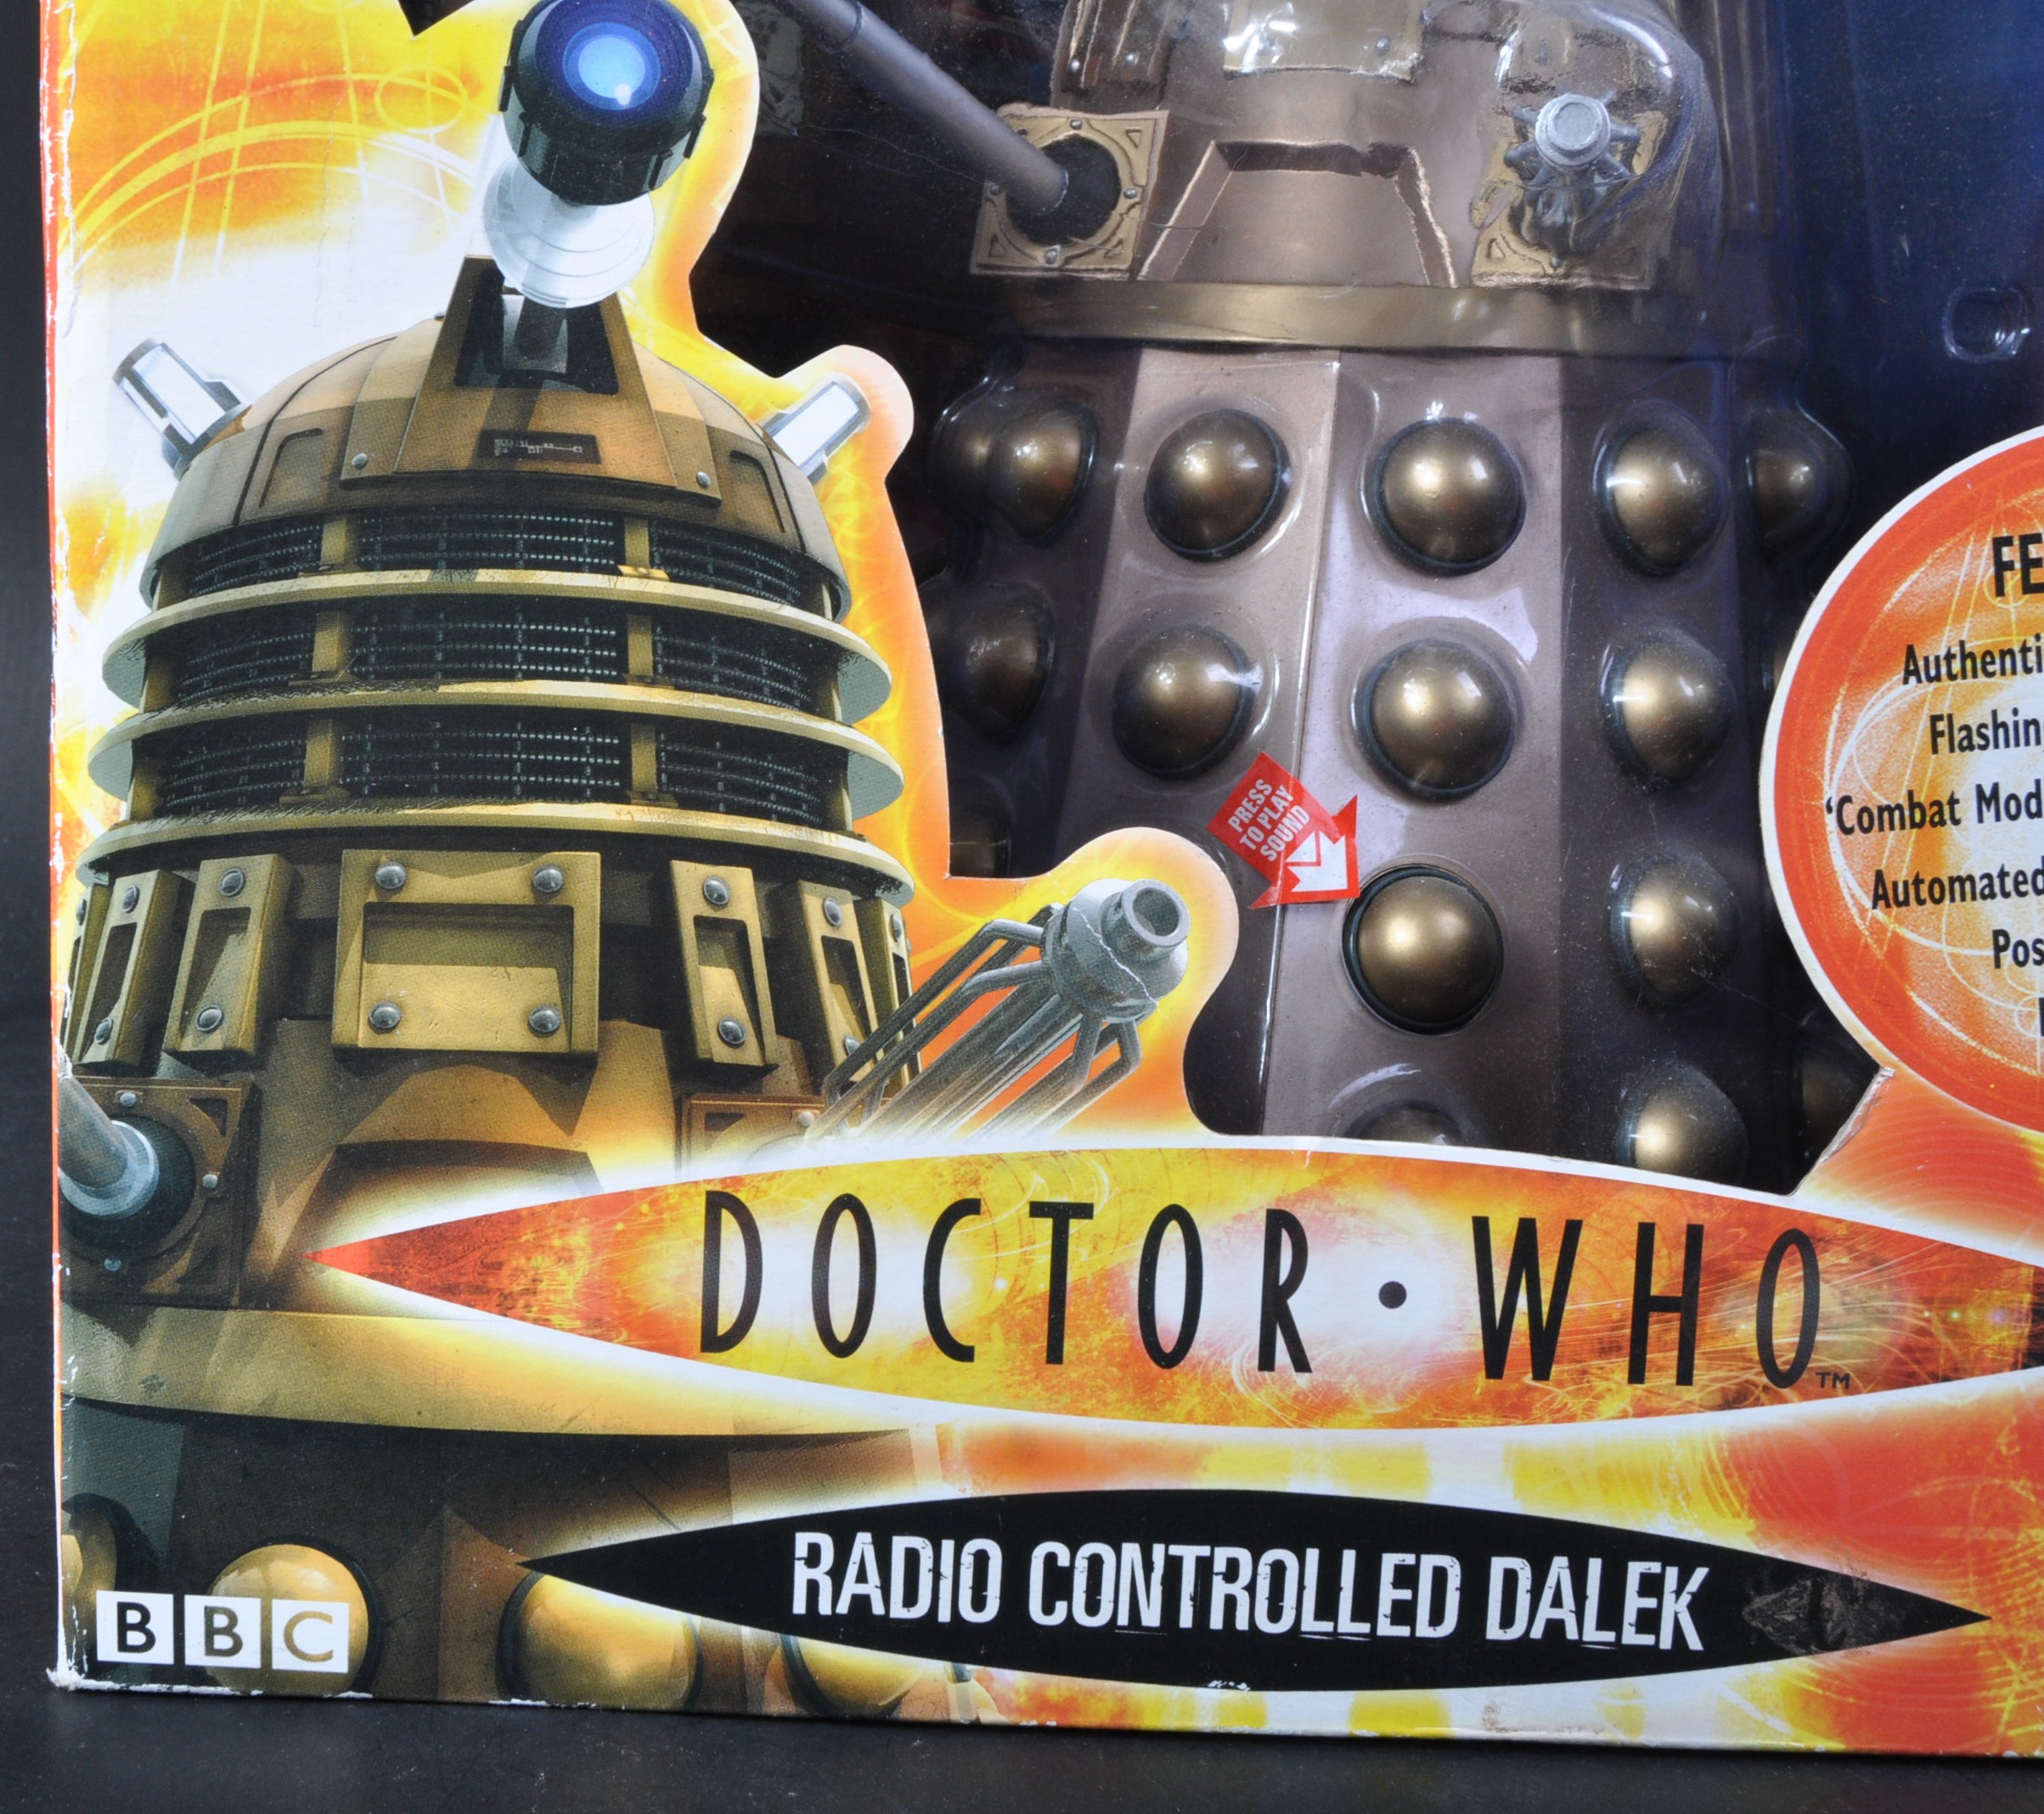 DOCTOR WHO - CHARACTER - LARGE SCALE RADIO CONTROLLED DALEK - Image 4 of 6